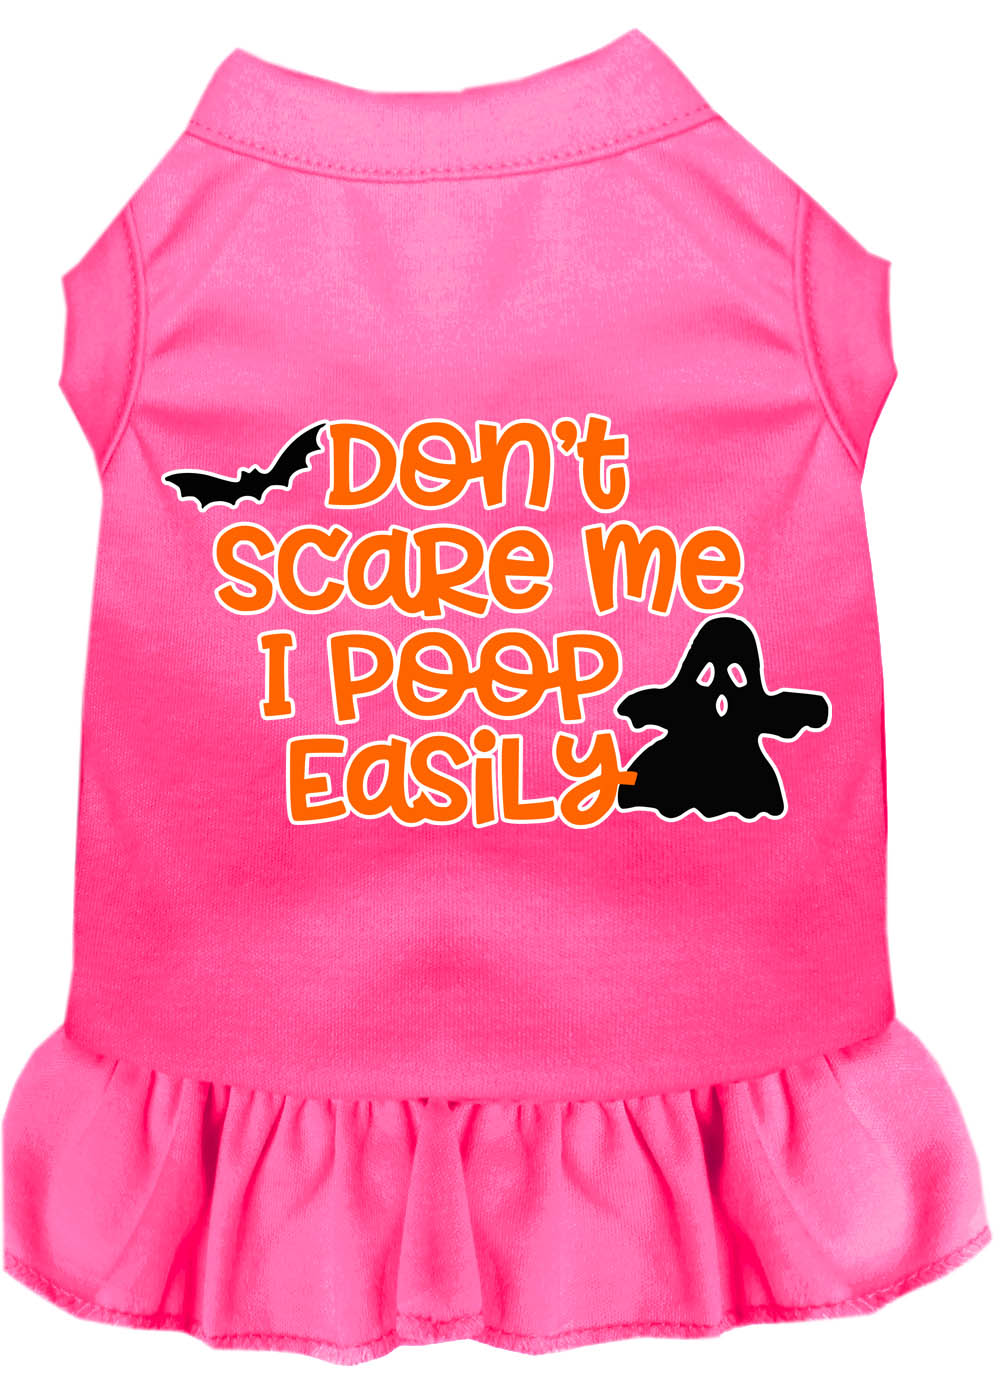 Don't Scare Me, Poops Easily Screen Print Dog Dress Bright Pink XXL